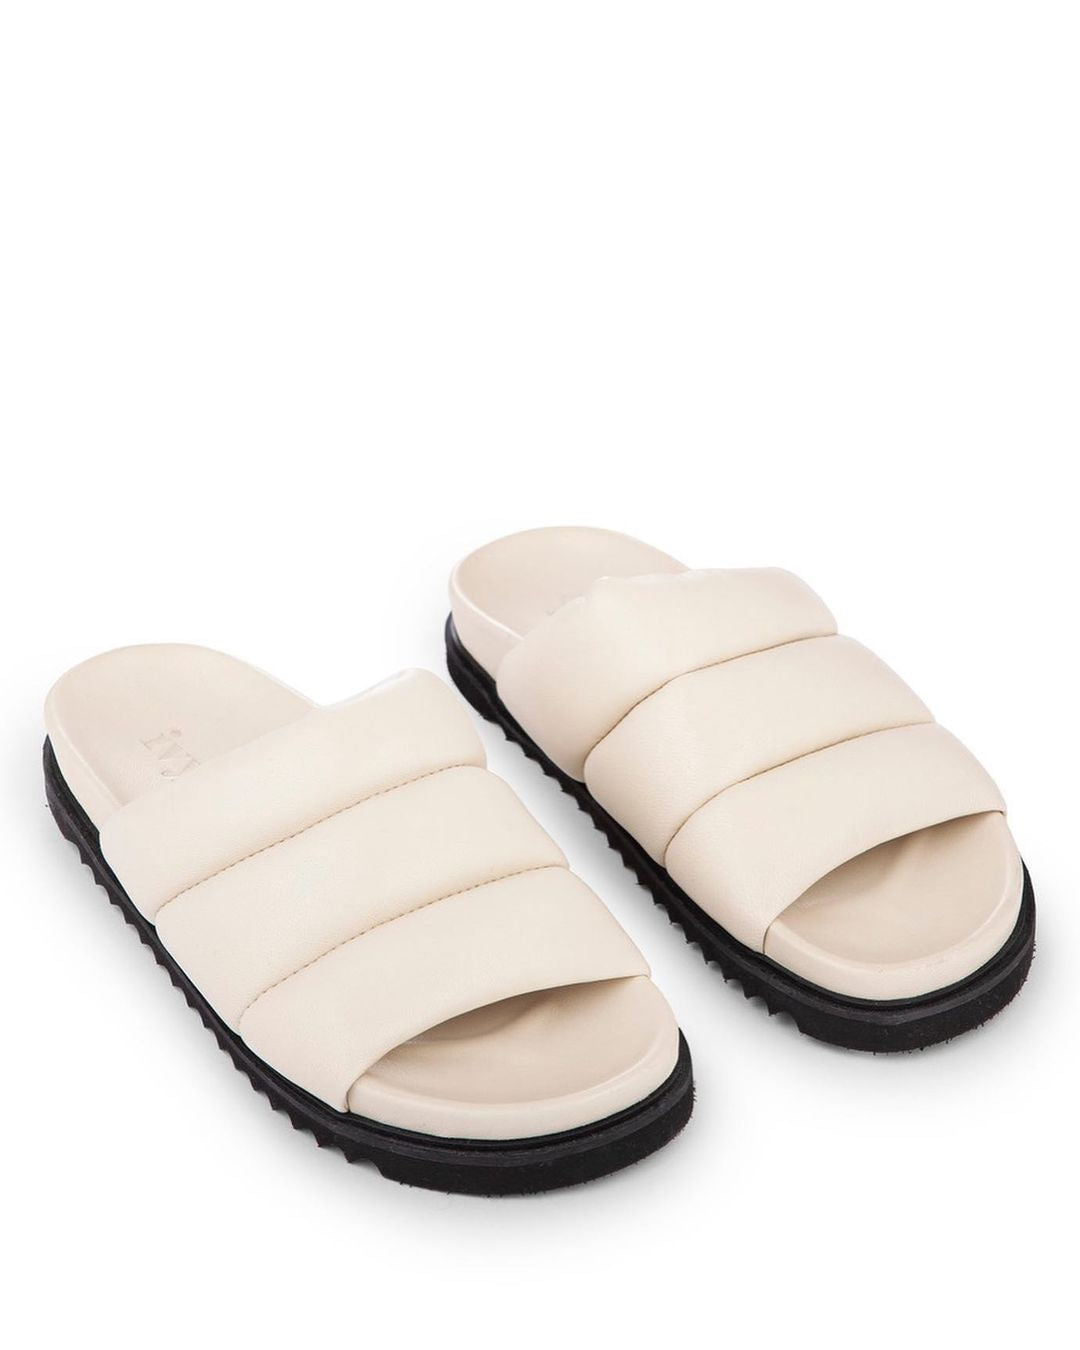 Marley Off White Leather Puffy Sandals 22-021-011 - OFF - 3